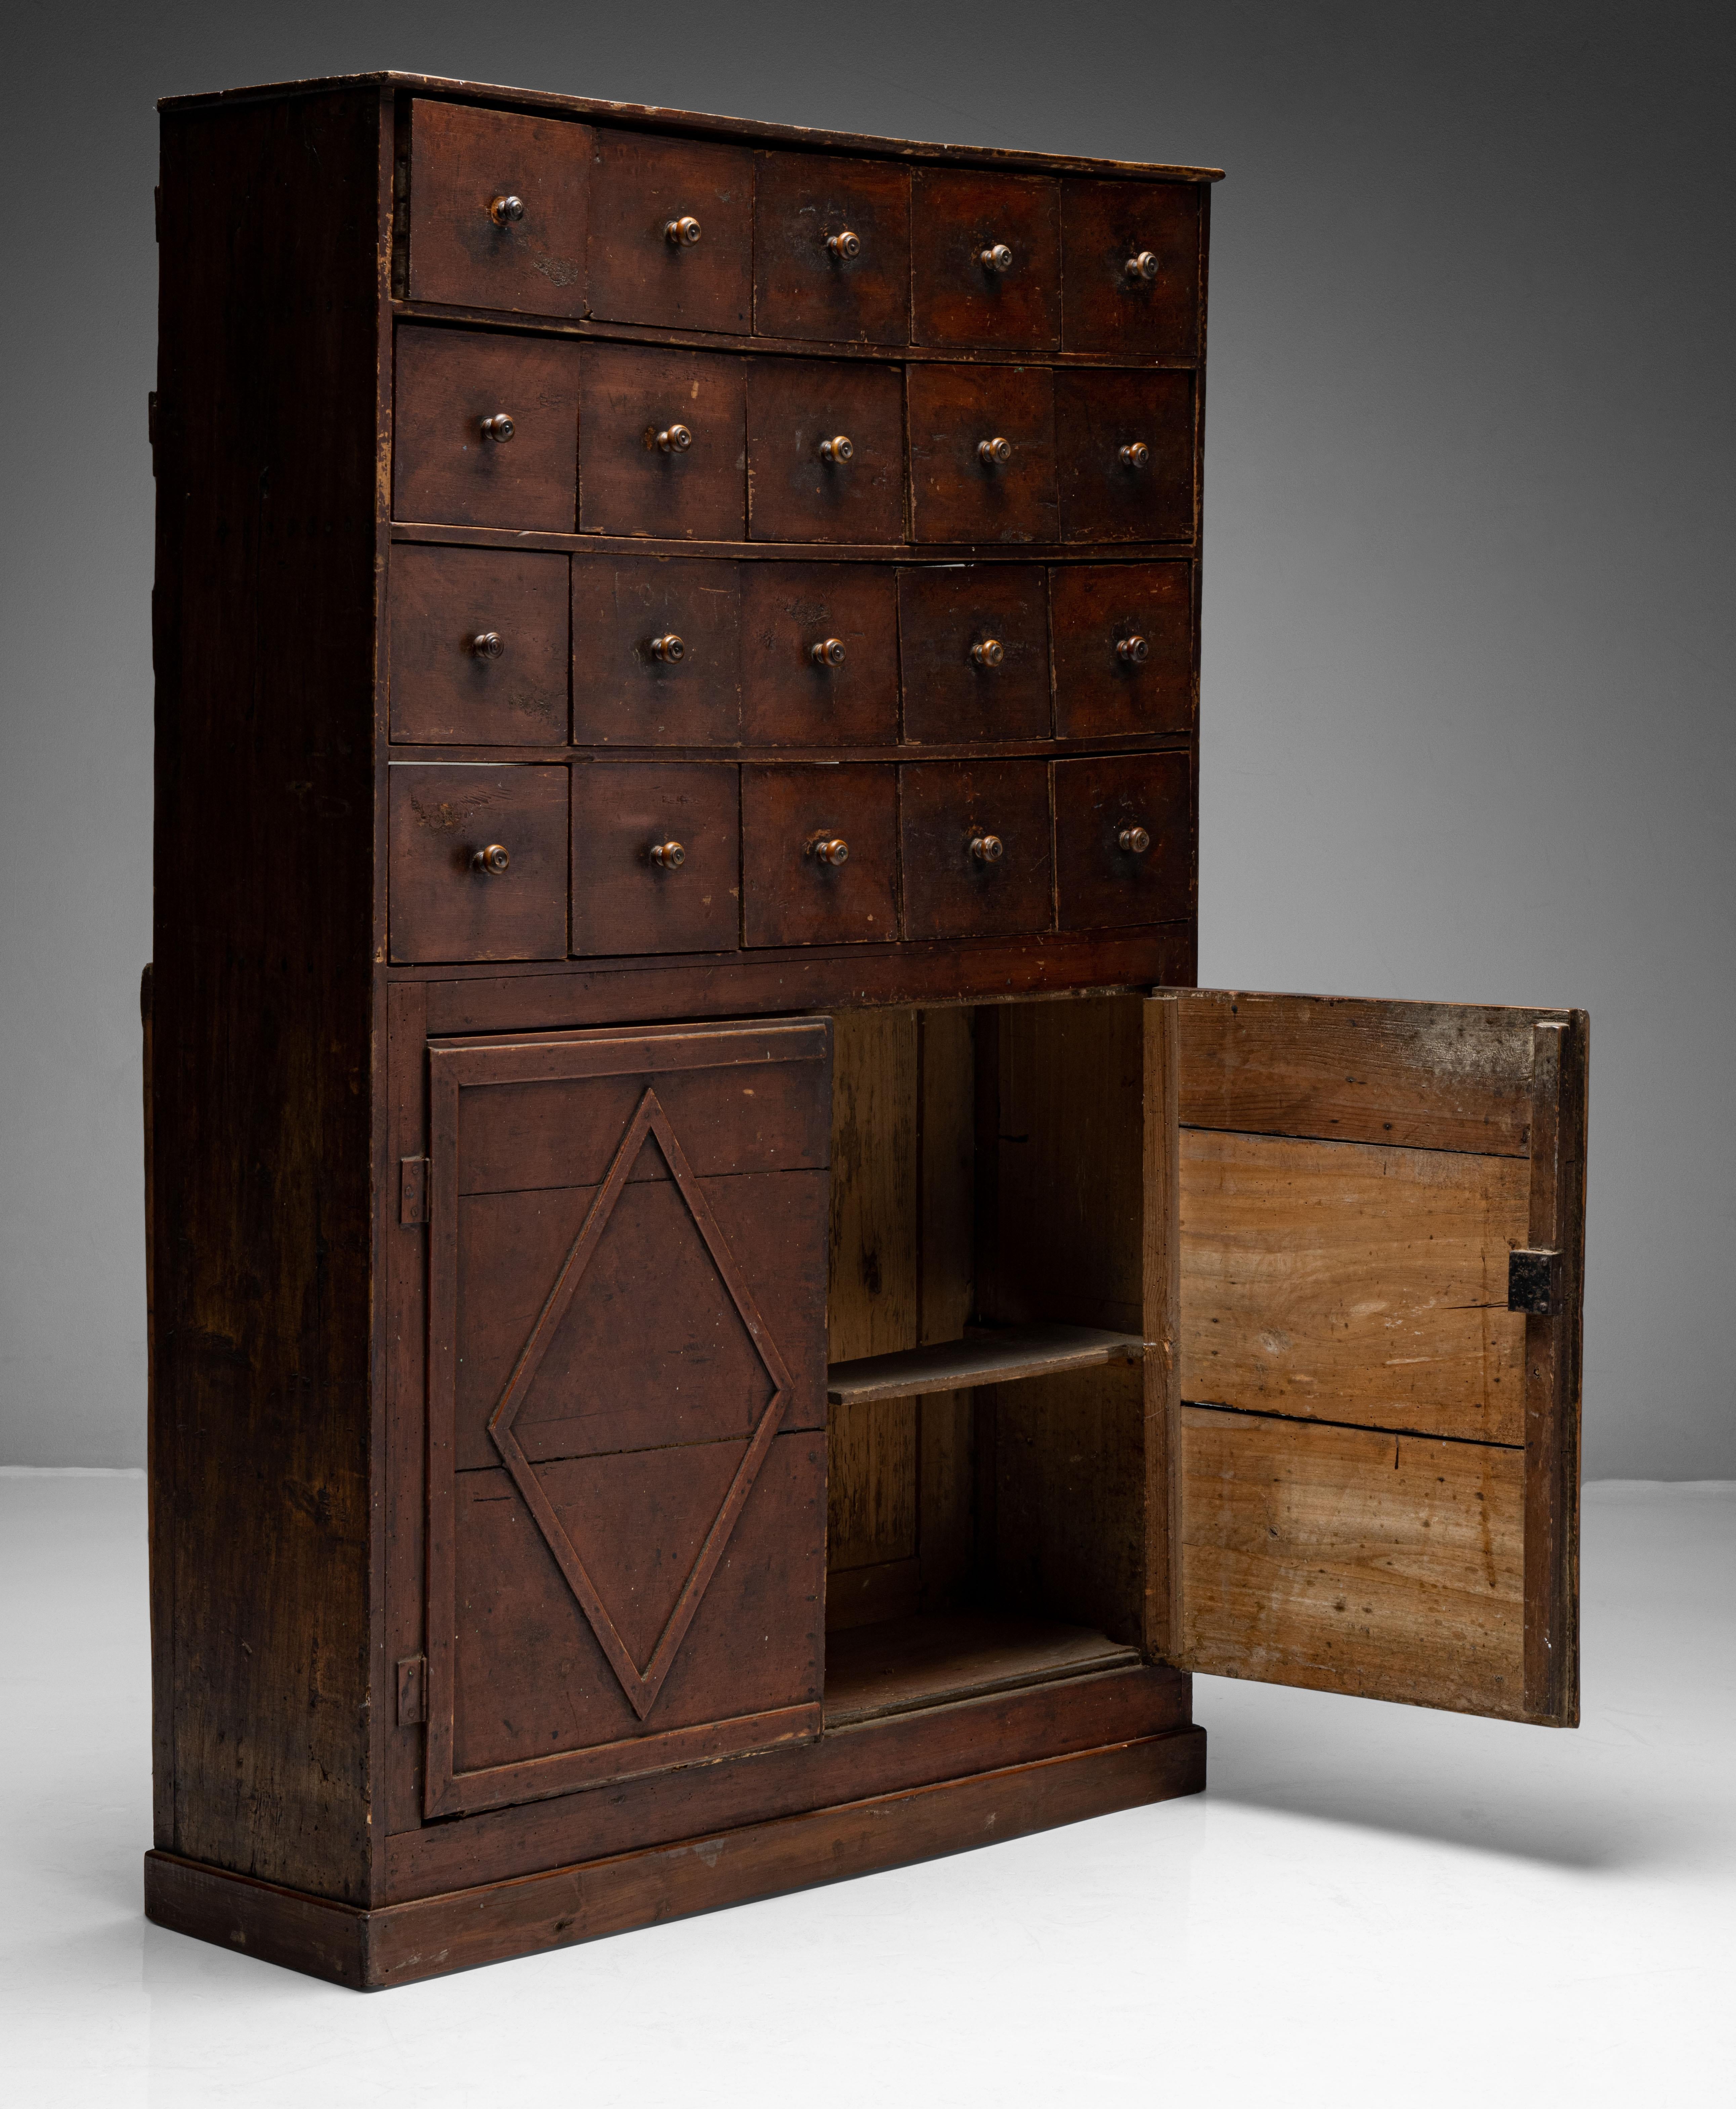 Painted Apothecary cabinet

England, Circa 1850

Pine cabinet in original painted finish with twenty drawers on top and cabinet below.